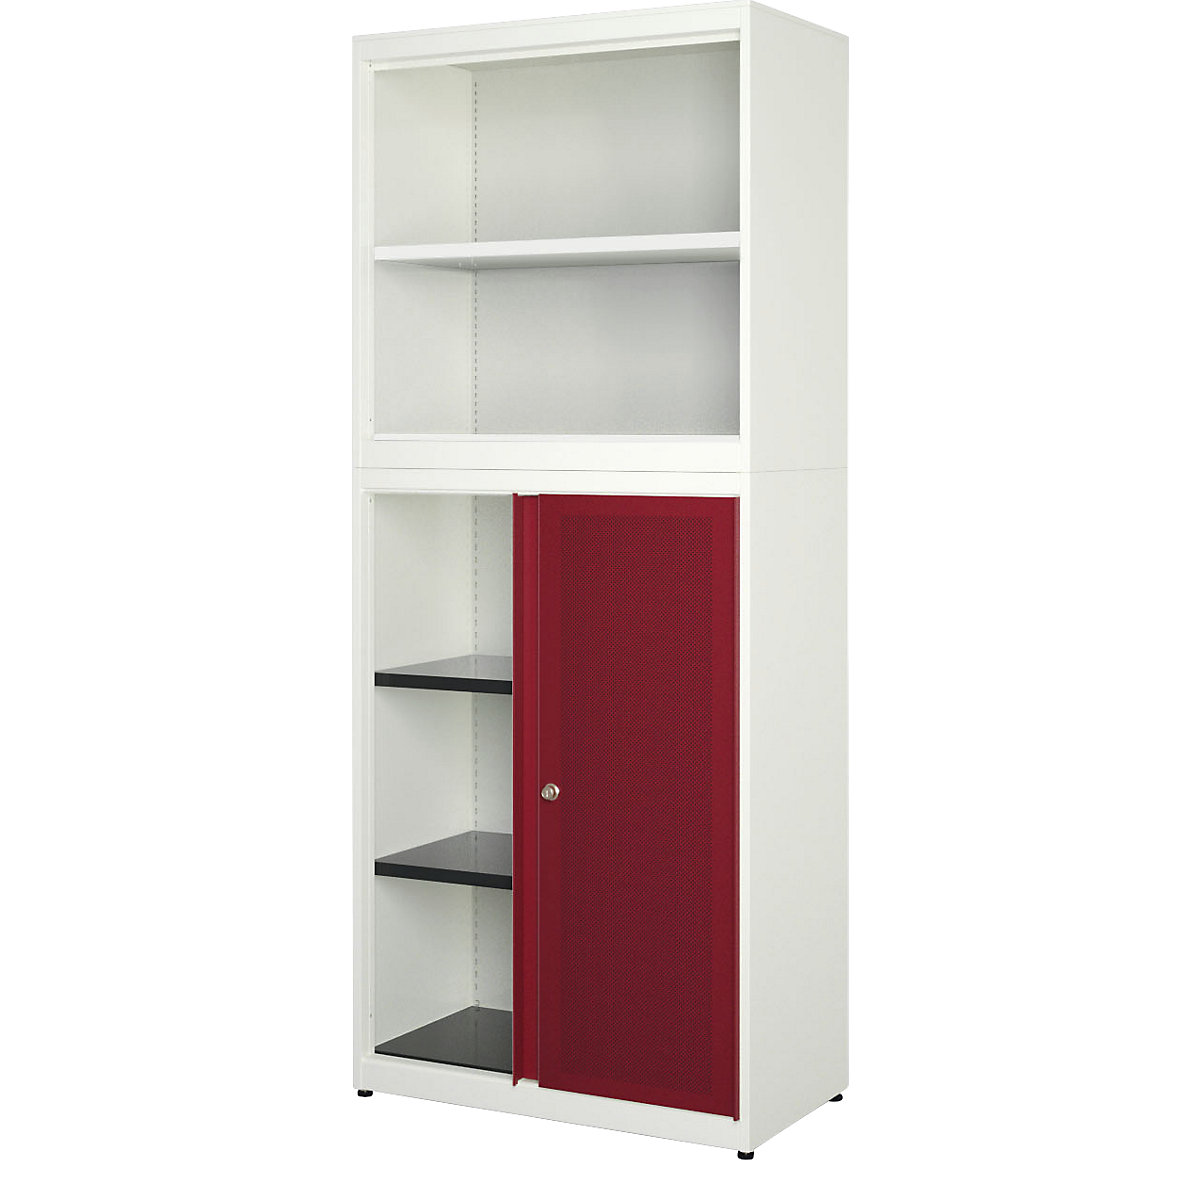 Cupboard combination with sliding doors - mauser